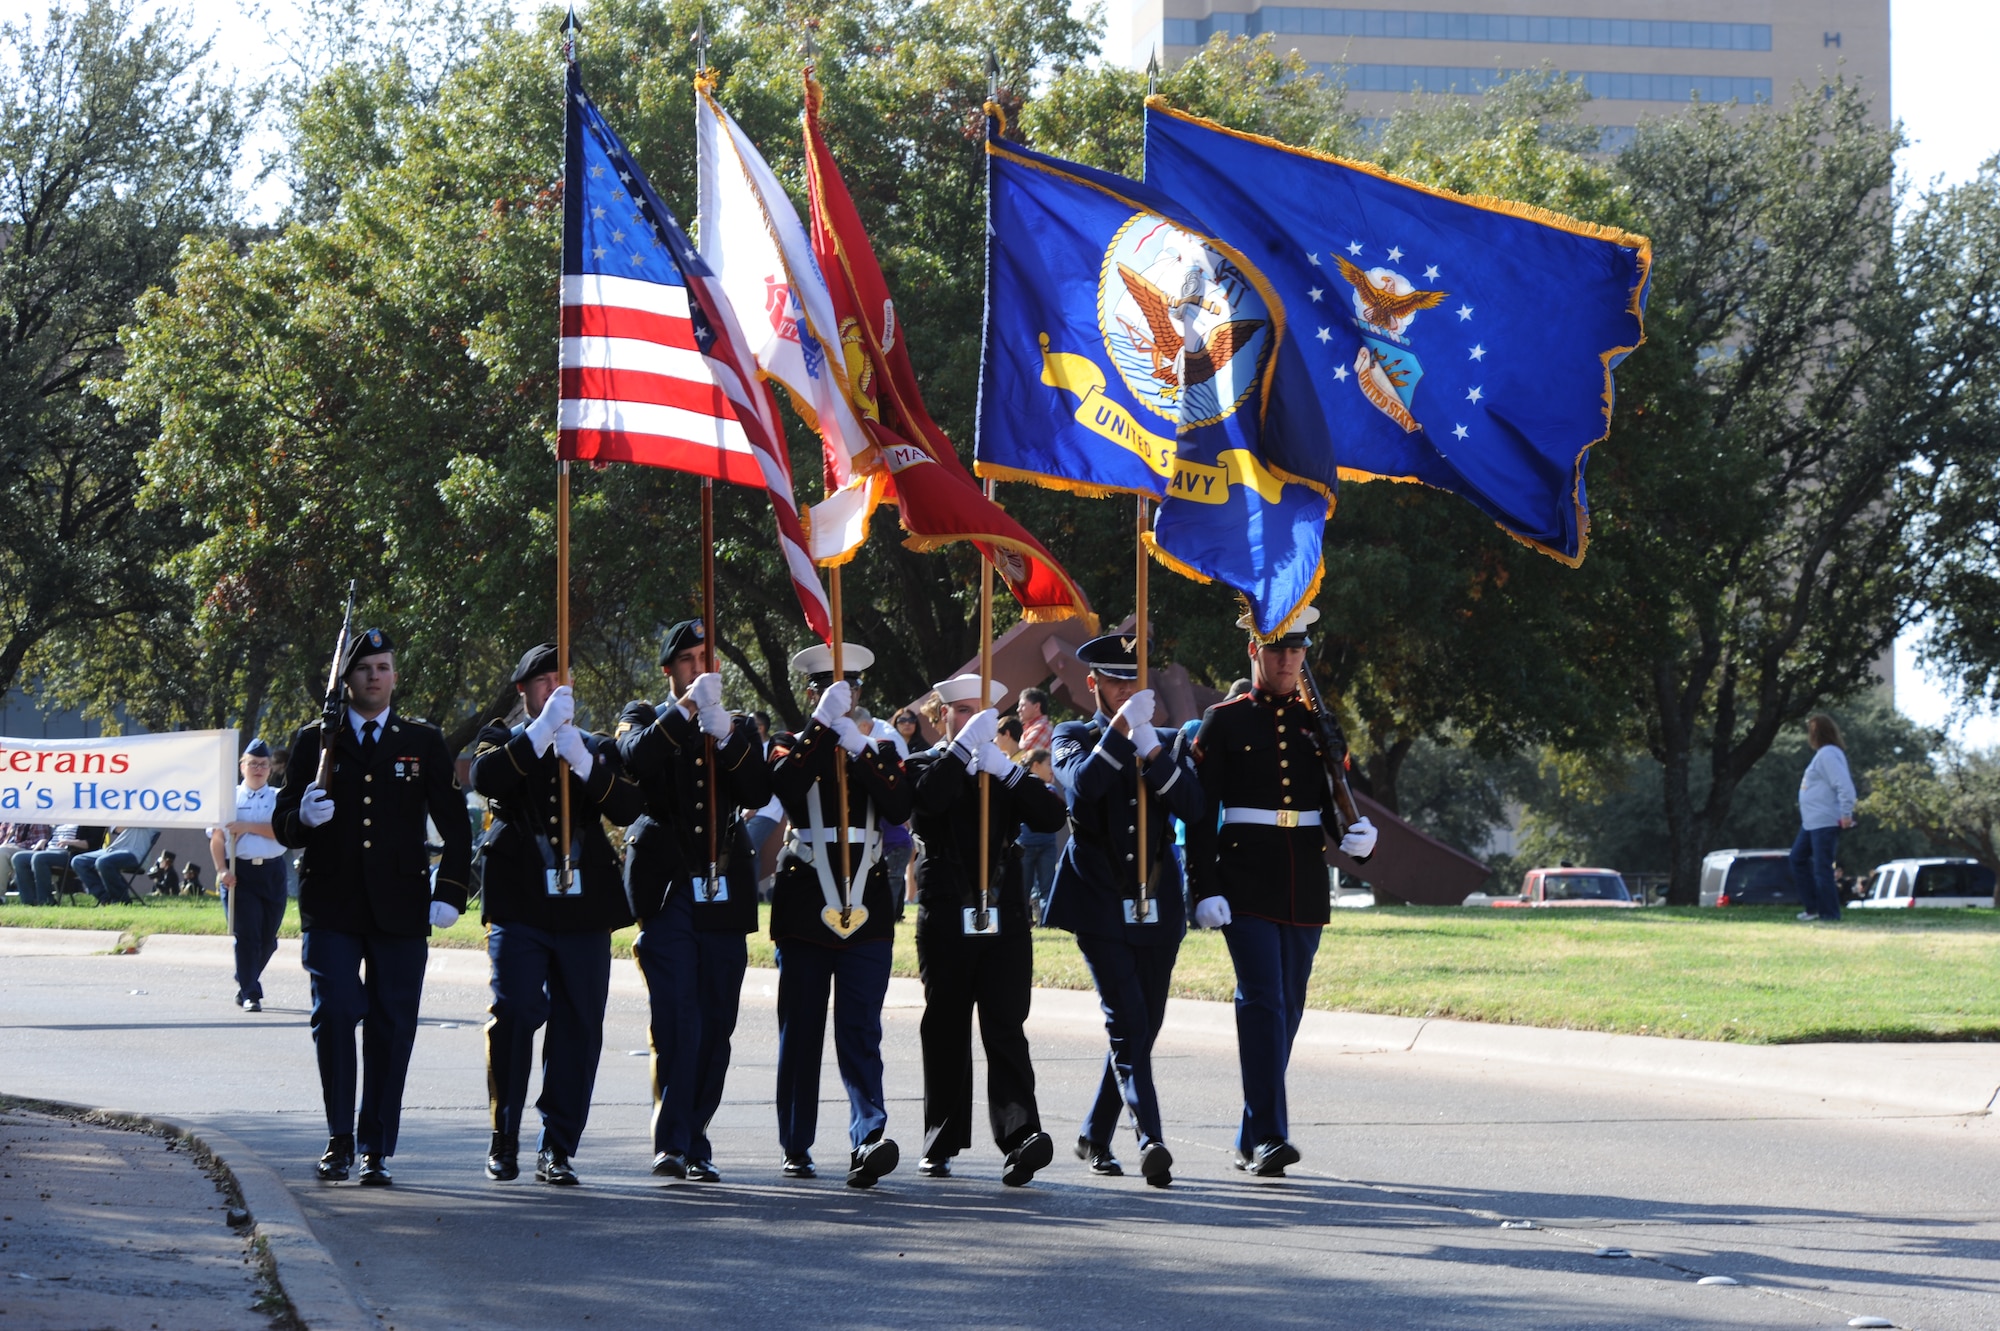 The color guard leads the Abilene Veterans Day parade Nov. 10, 2012, in Abilene, Texas. Dyess Air Force Base Airmen marched alongside local Junior Reserve Officers’ Training Corps cadets and marching bands in Abilene's annual parade to commemorate the service military members provide to the United States. (U.S. Air Force photo by Airman 1st Class Peter Thompson/ Released) 